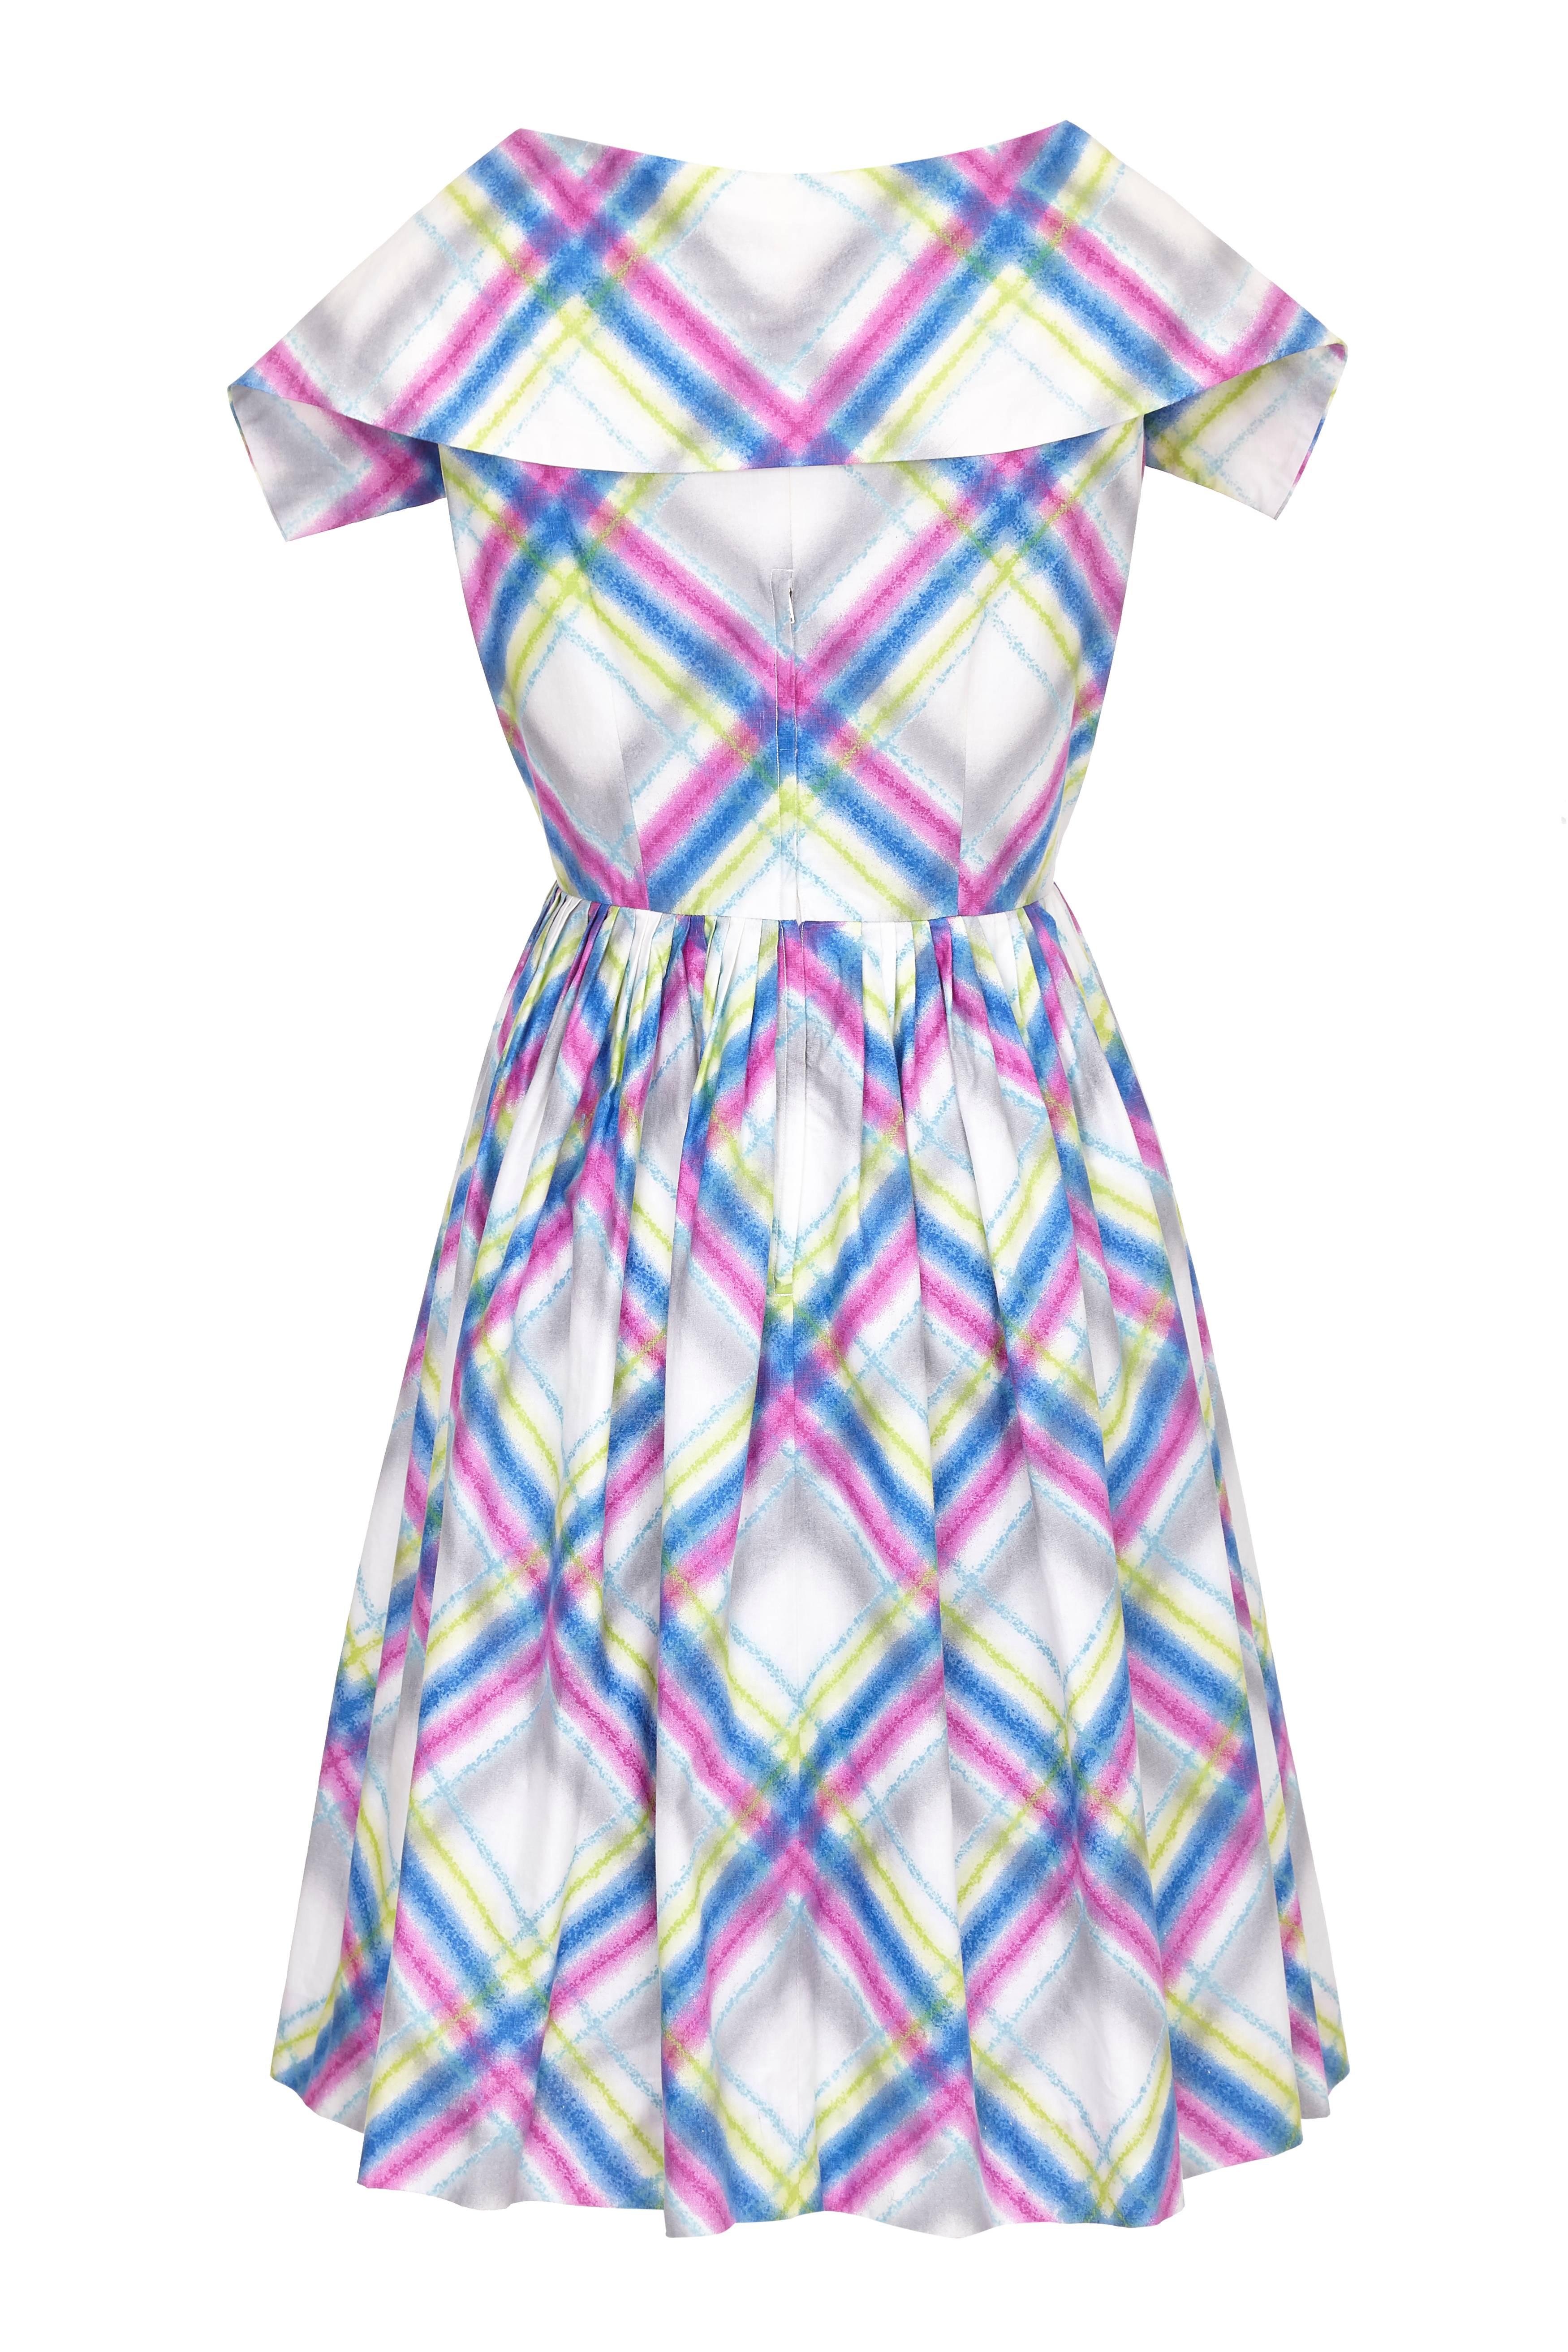 This pretty 1950s cotton dress with a multi-coloured watercolour plaid print features a deep V neckline with a wide collar, wrap-over front and a full pleated calf length skirt. The thick cotton fabric has retained all the vibrancy of print in